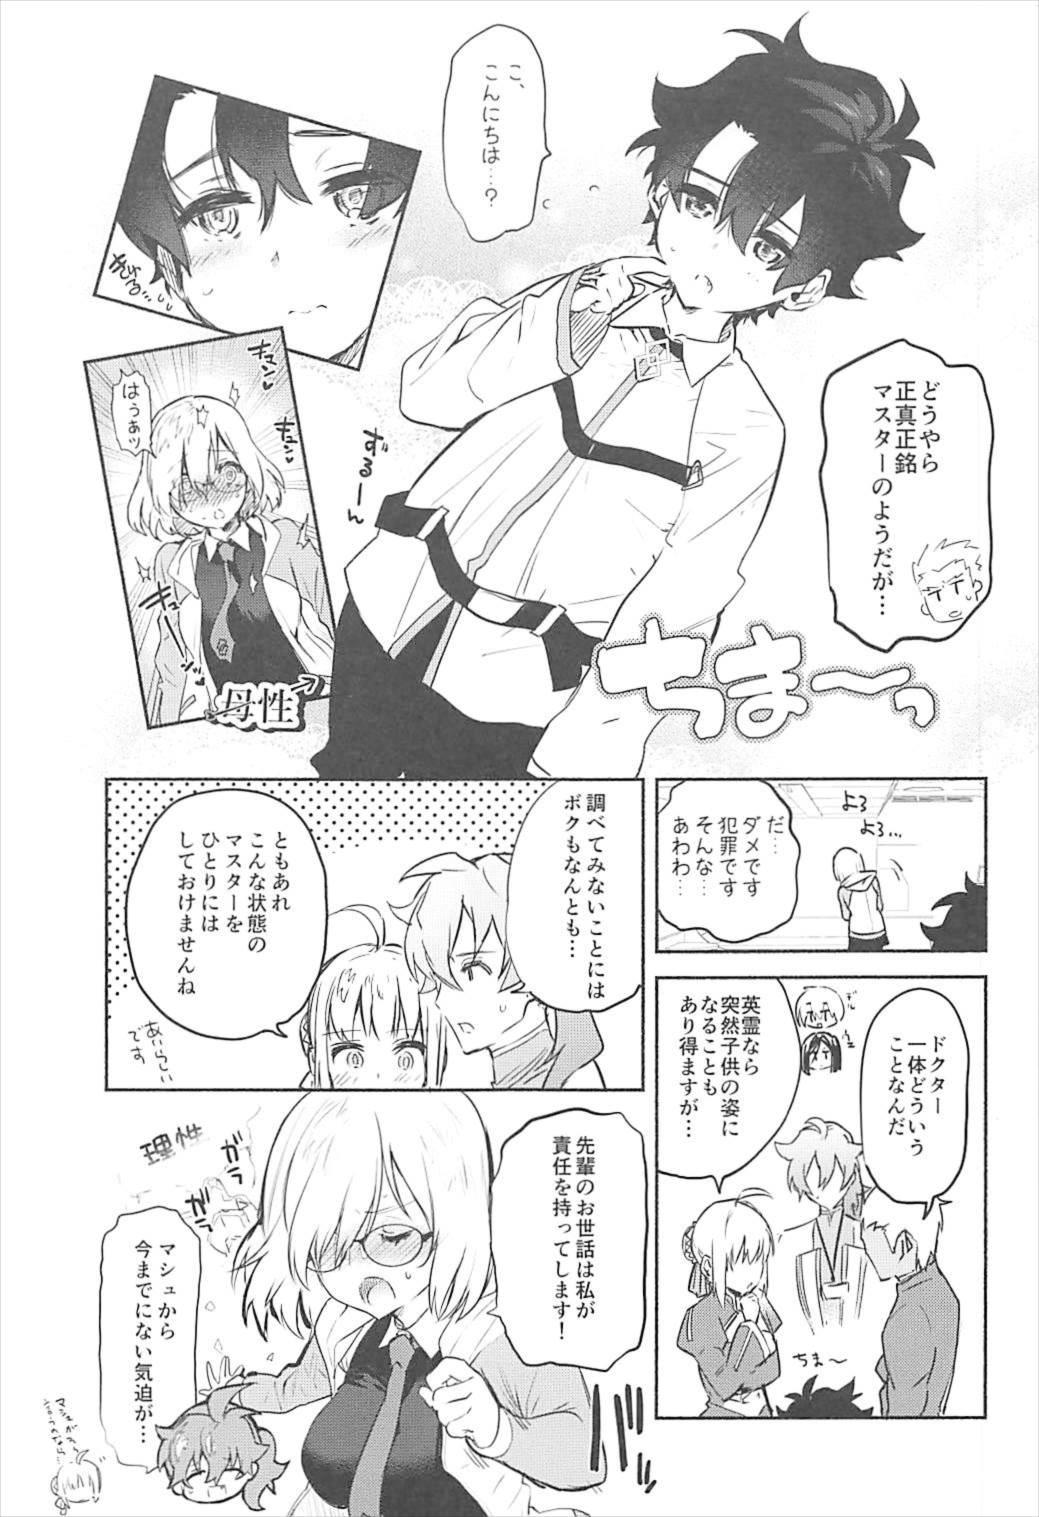 Romantic Mash to Issho - Fate grand order Submissive - Page 4